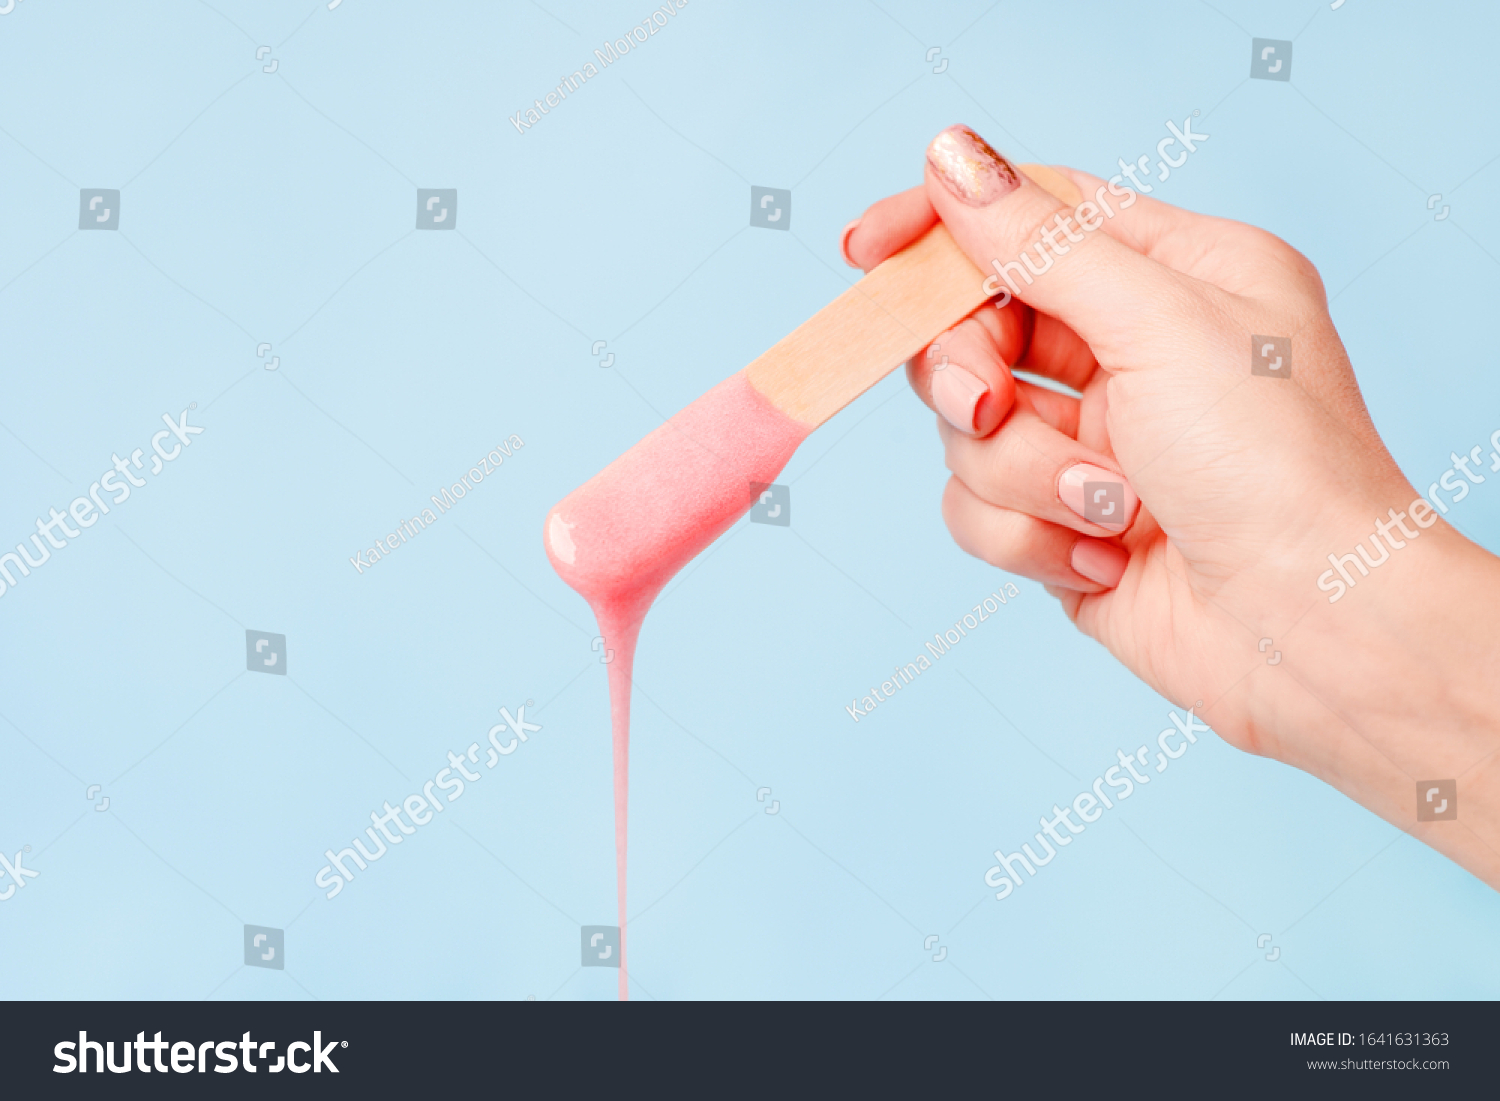 liquid pink pearl wax or sugar paste for depilation drains from the stick on blue background. The concept of depilation, waxing, sugaring smooth skin without hair, banner, copy space #1641631363